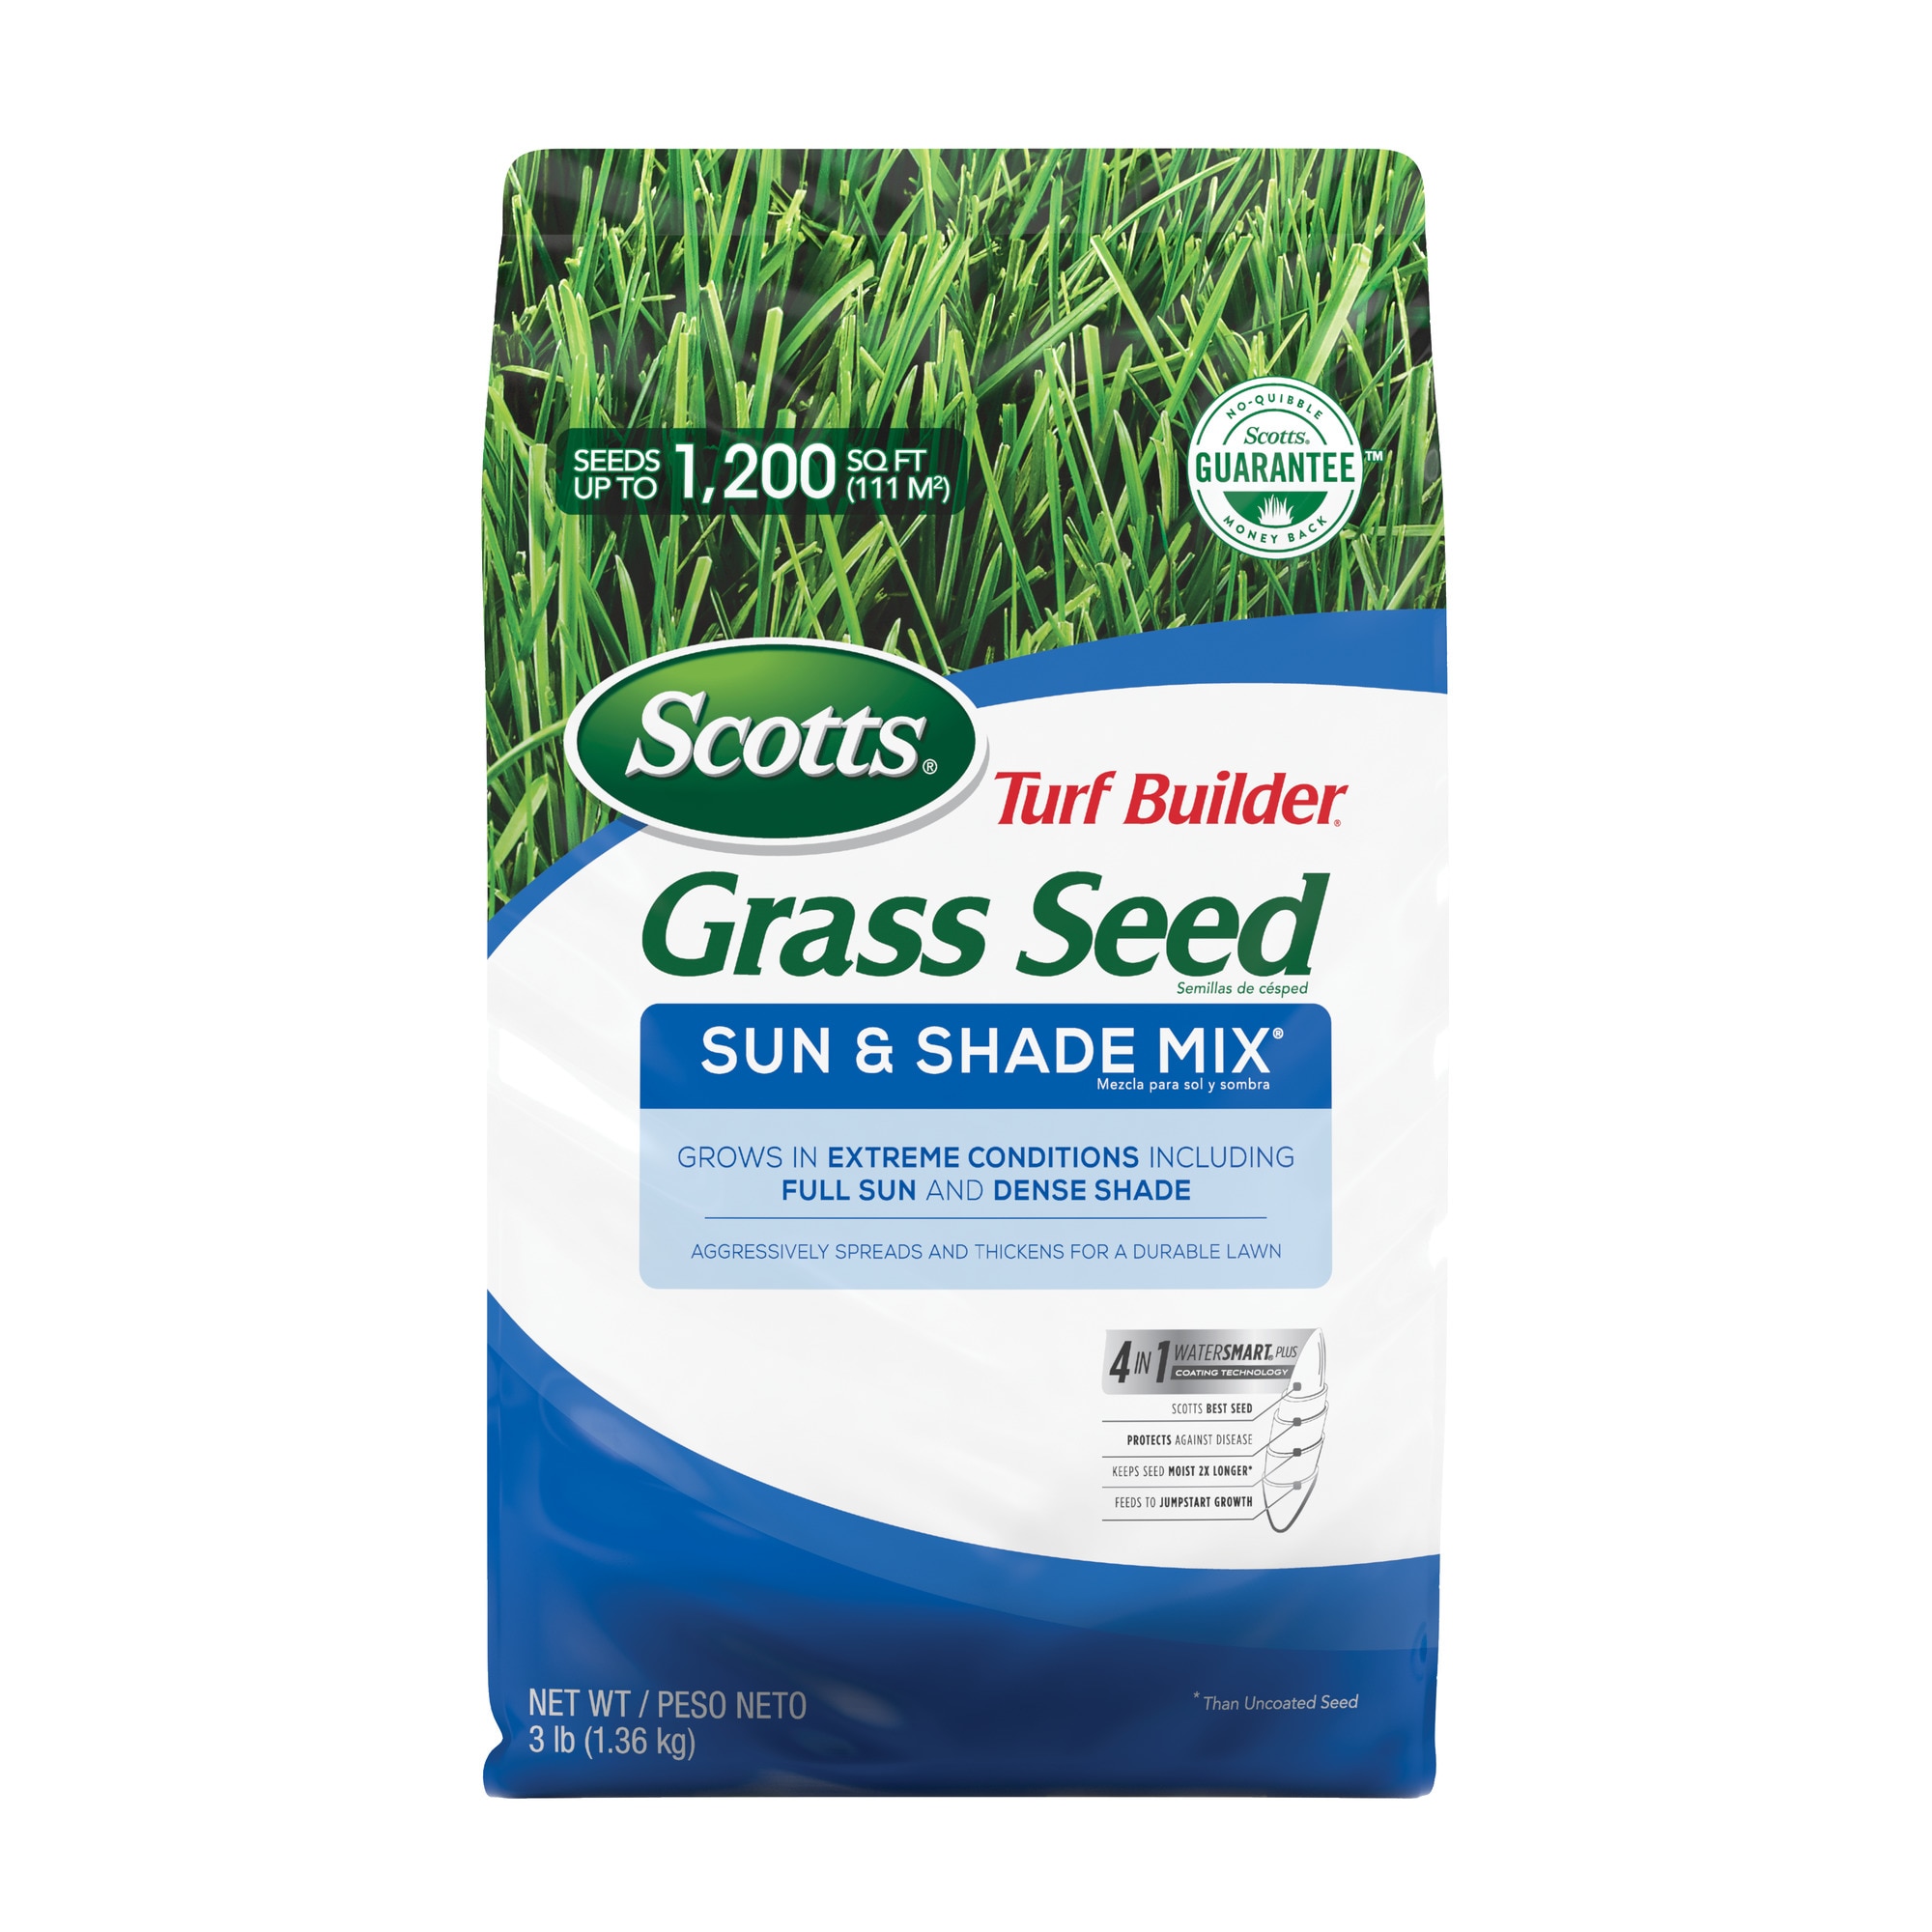 Not Sold in Louisia 3-Pound Sun and Shade Mix Scotts Turf Builder Grass Seed 